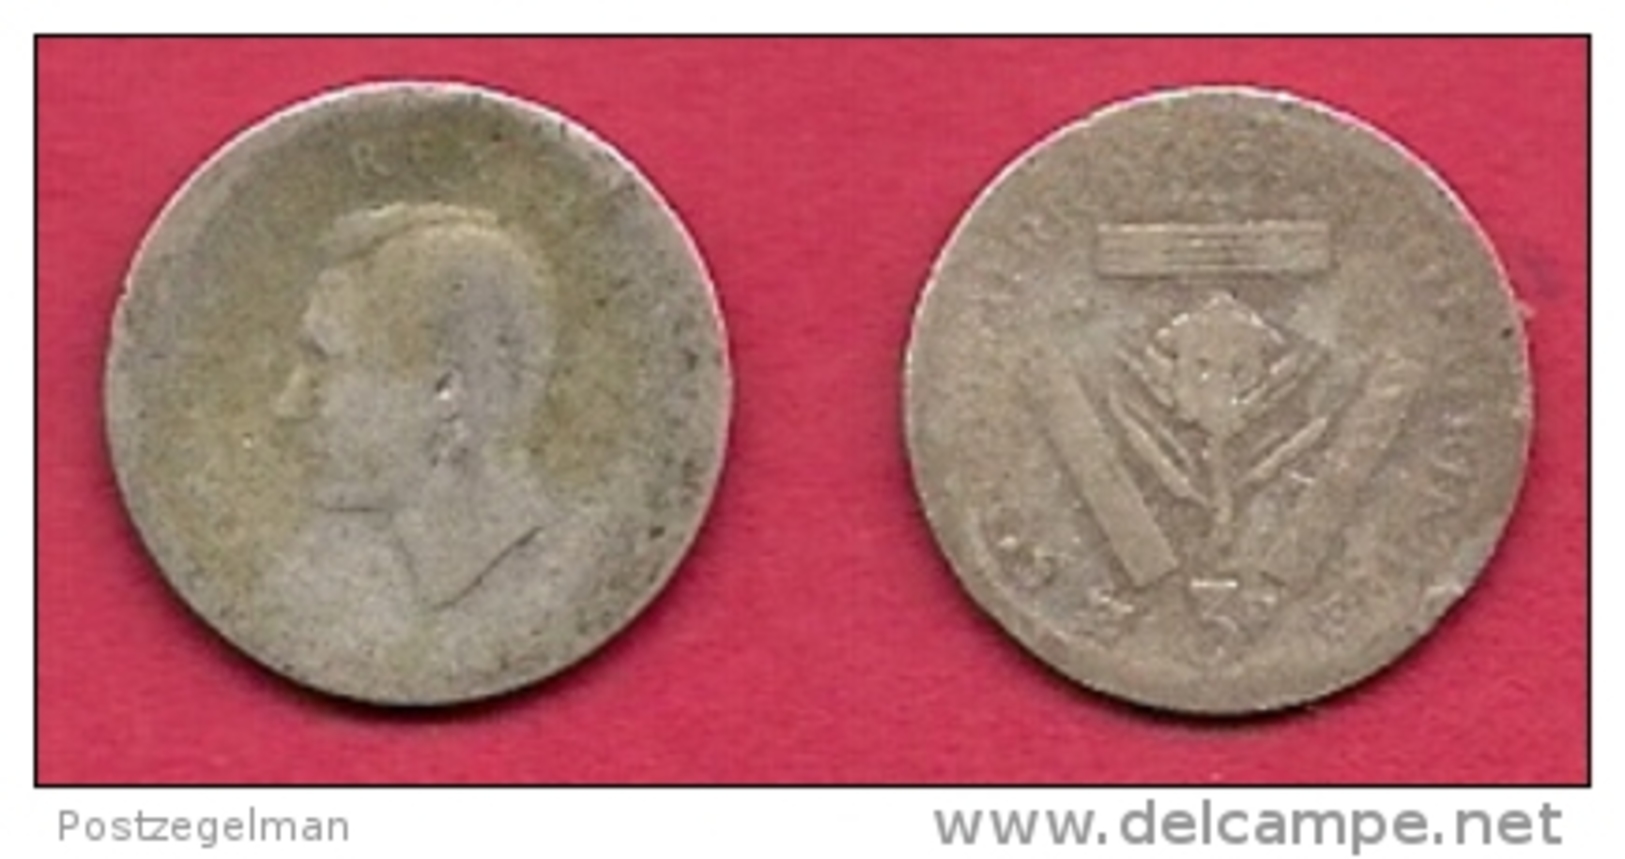 SOUTH AFRICA, 1939,  3d, 0.800 Silver, Nicely Used Coin,  George VI, KM26, C2703 - South Africa